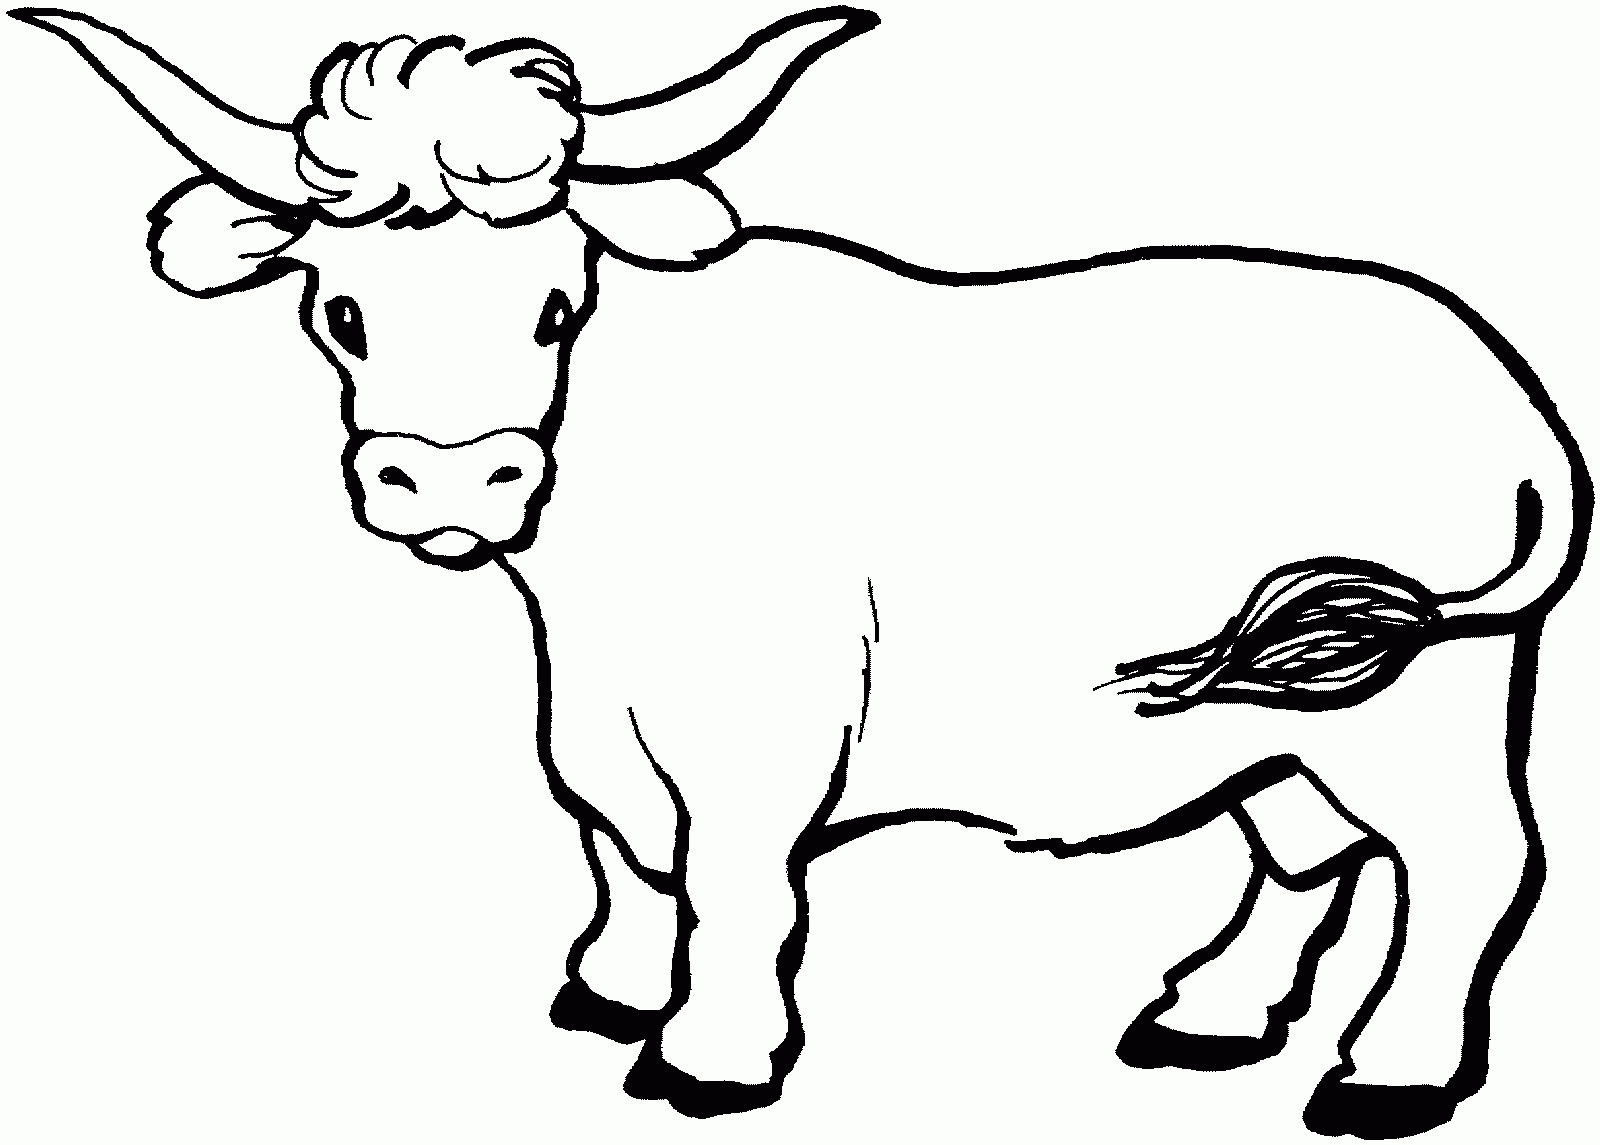 Coloring Pages : Cow Coloring Pages Horse And Mary Engelbreit Free - Coloring Pages Of Cows Free Printable